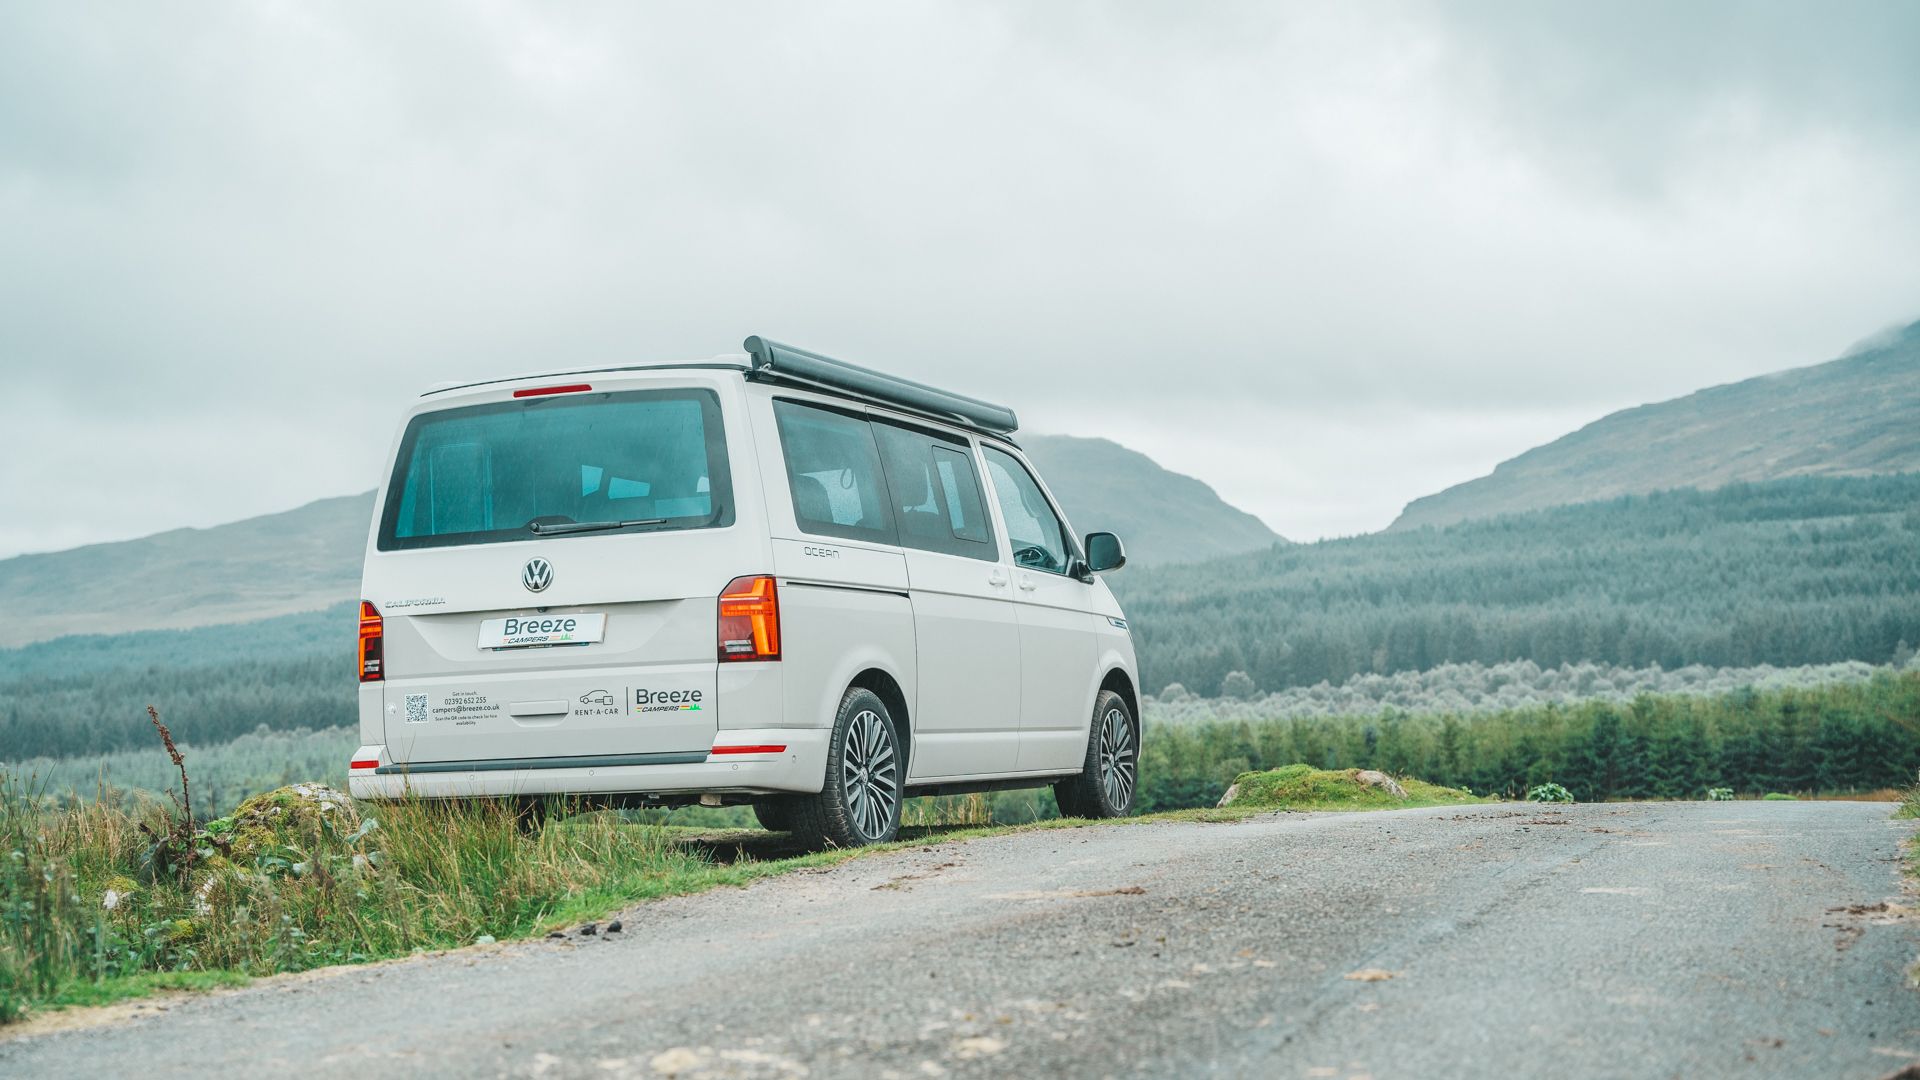 Volkswagen California Ocean rental from Breeze Campers Portsmouth to travel around Welsh countryside